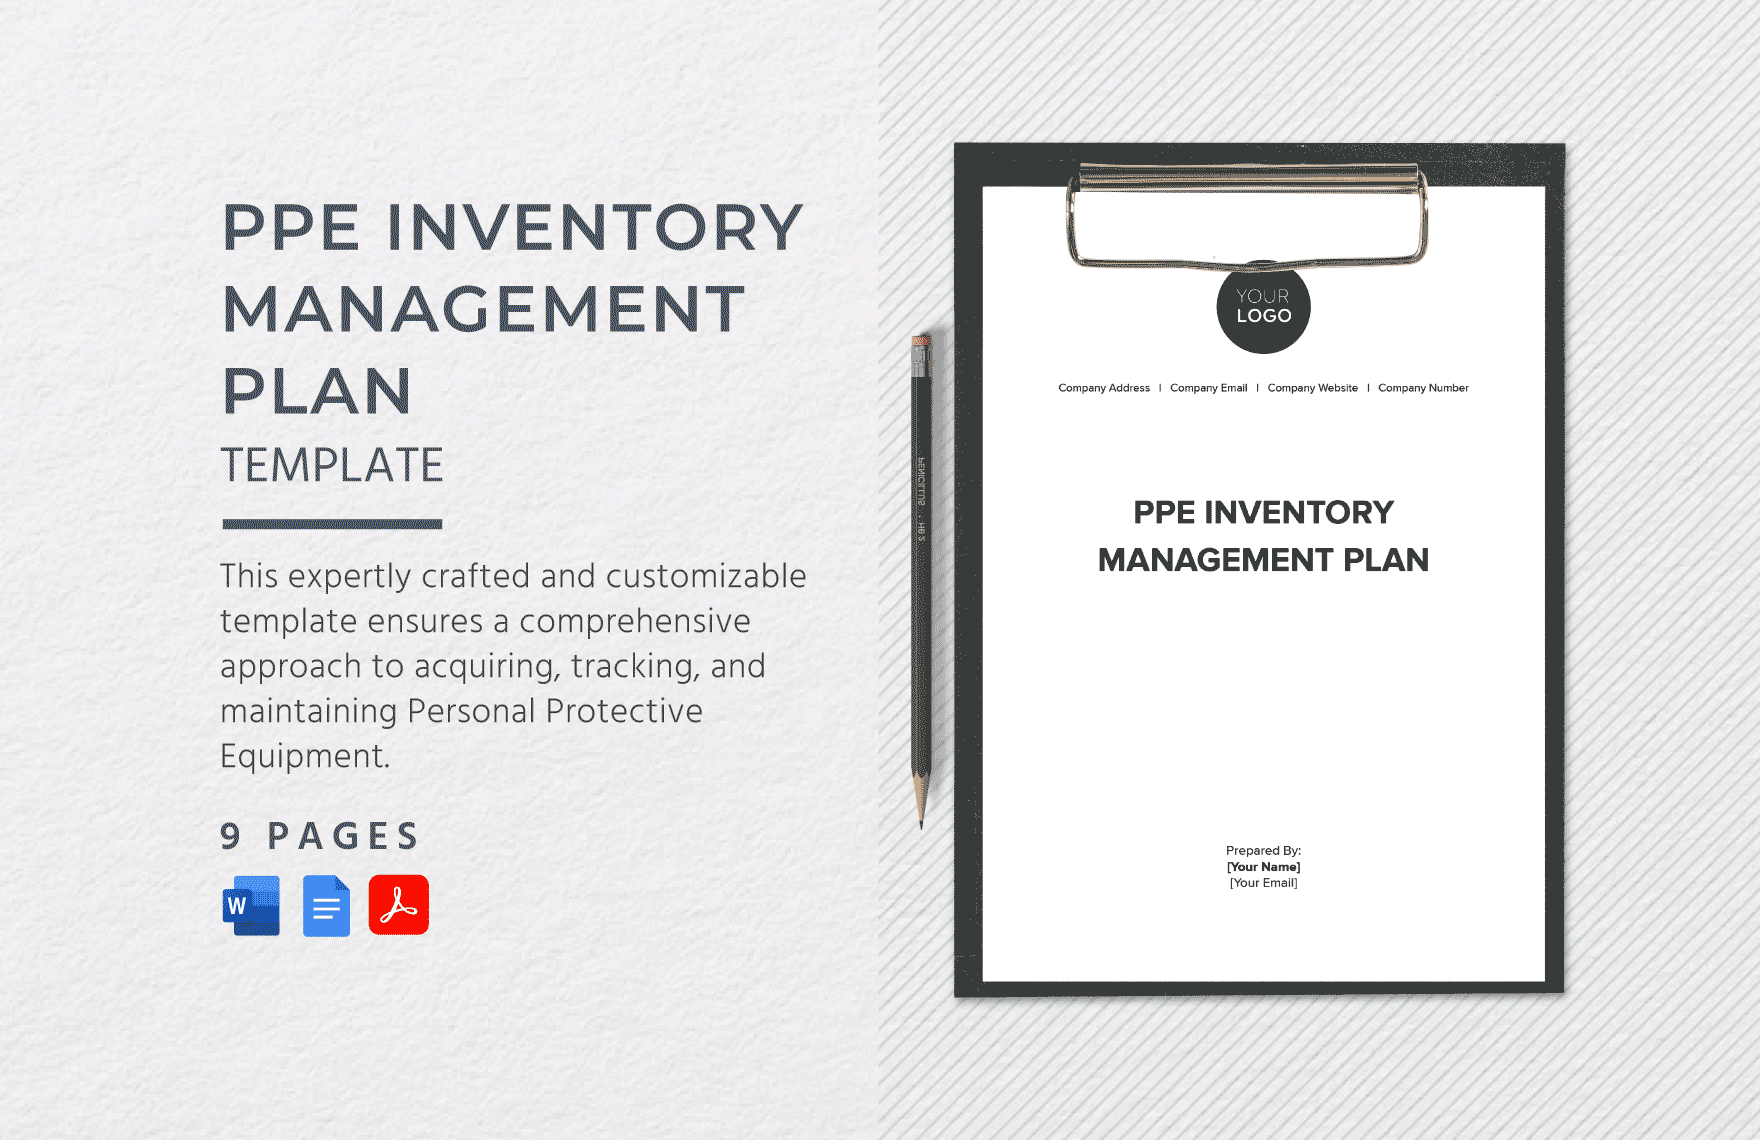 PPE Inventory Management Plan Template